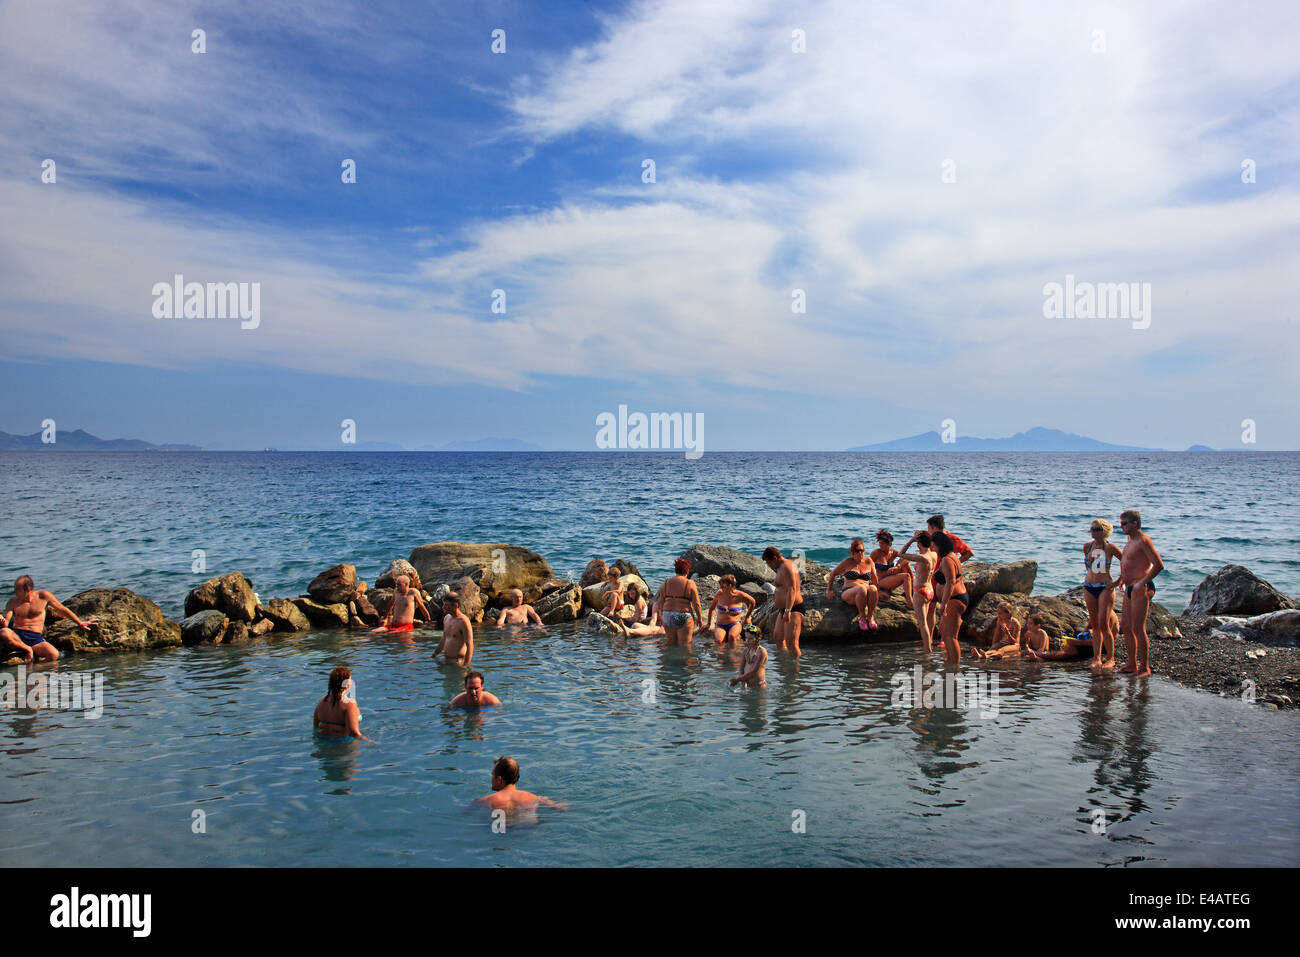 Enjoying a natural spa at the thermal springs of Therma (or 'Empros Thermes') beach, Kos island, Dodecanese, Greece. Stock Photo